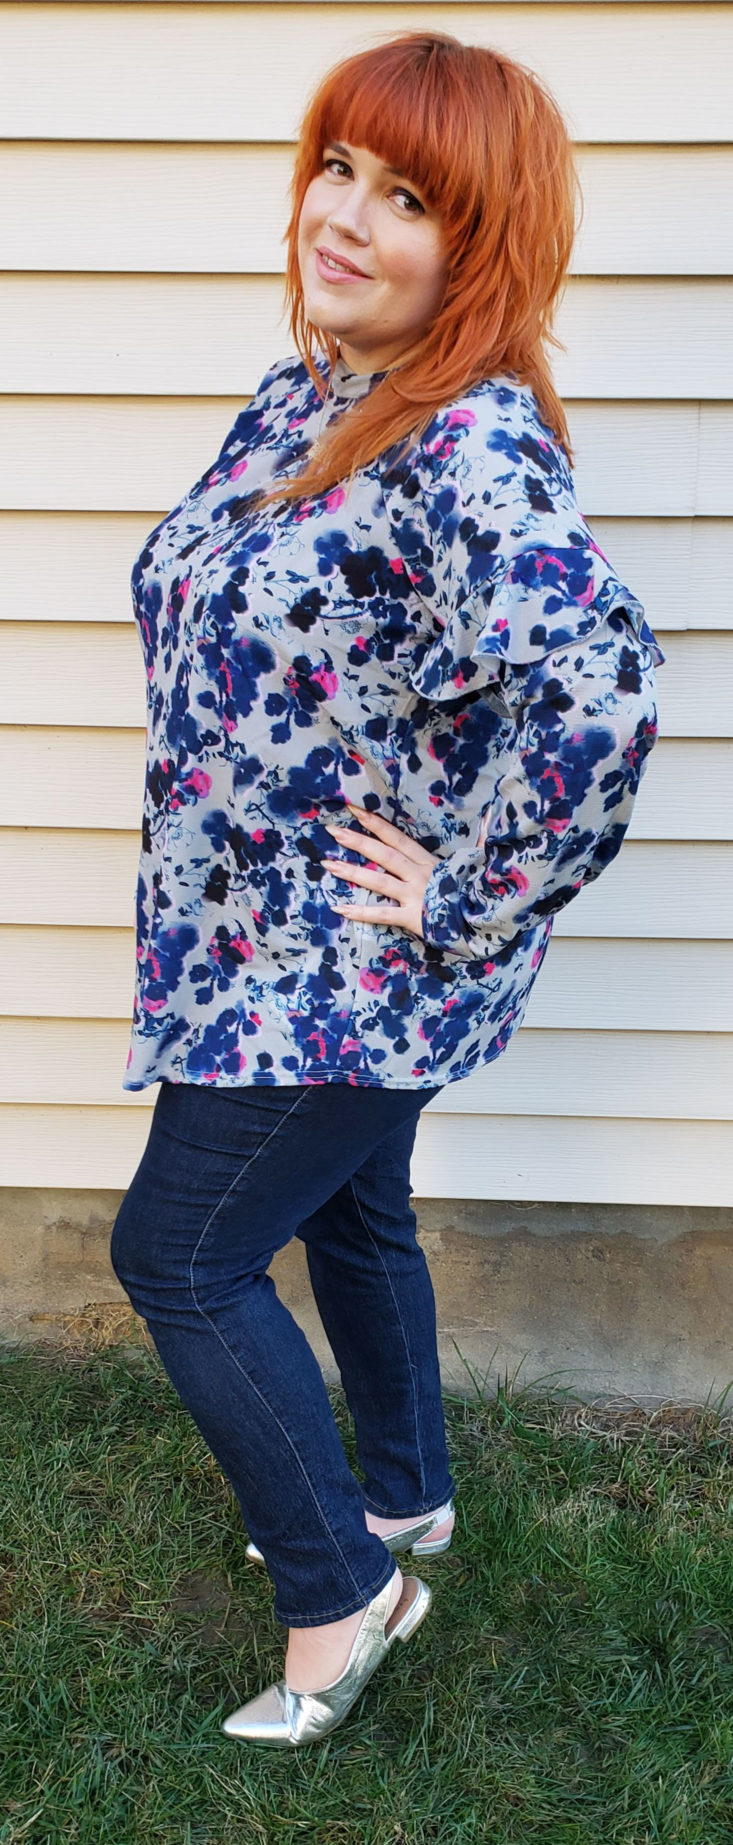 Trunk Club Plus Size Subscription Box Review November 2018 - Top in Abstract Floral Print by Lost Ink 3 Side